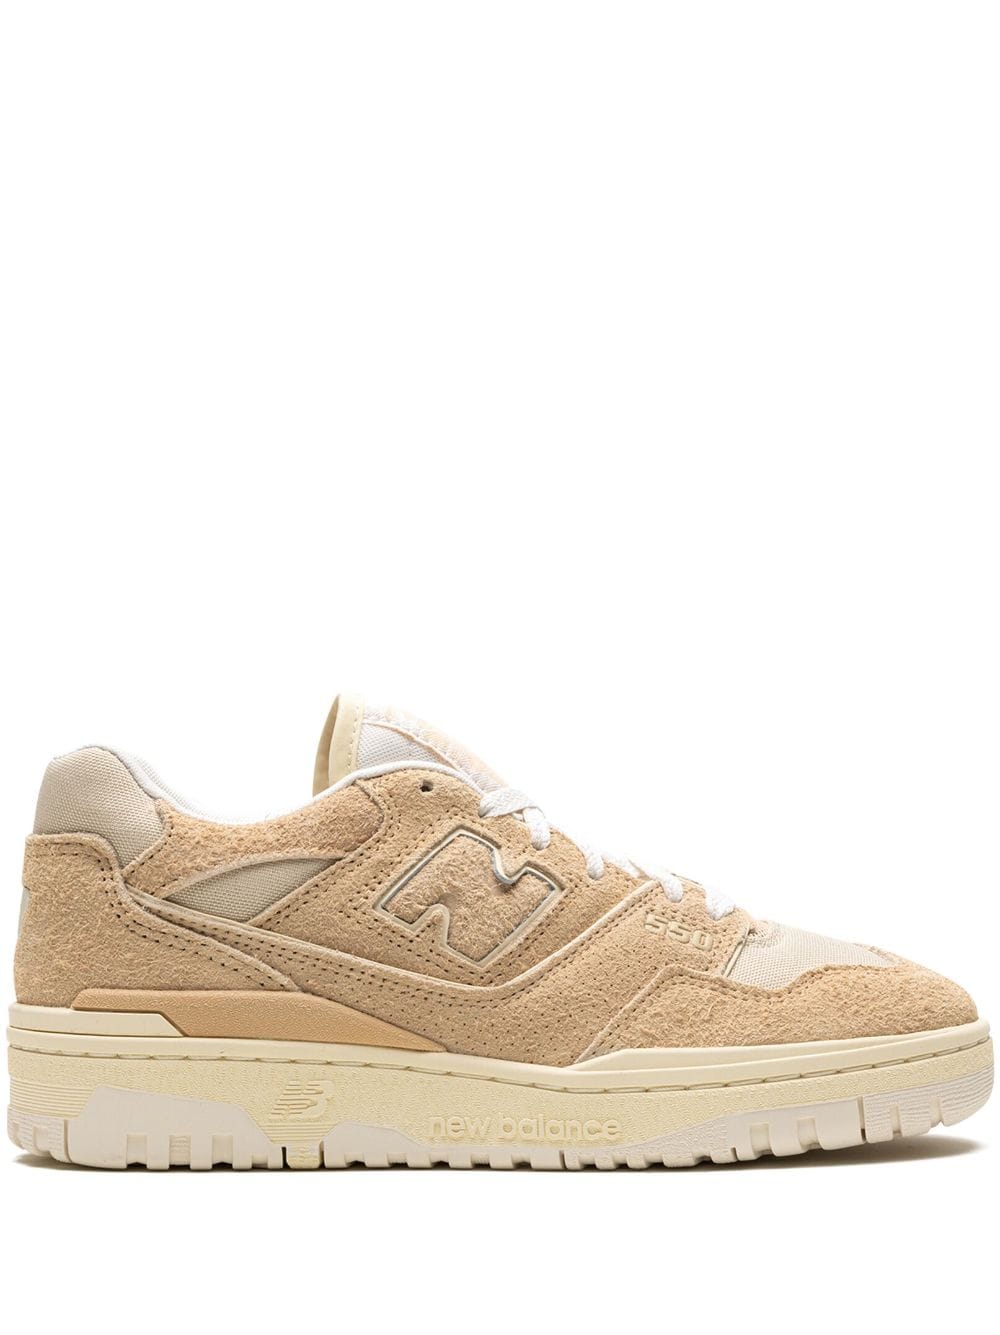 New Balance 550 "Aime Leon Dore Taupe Suede" sneakers - Neutrals